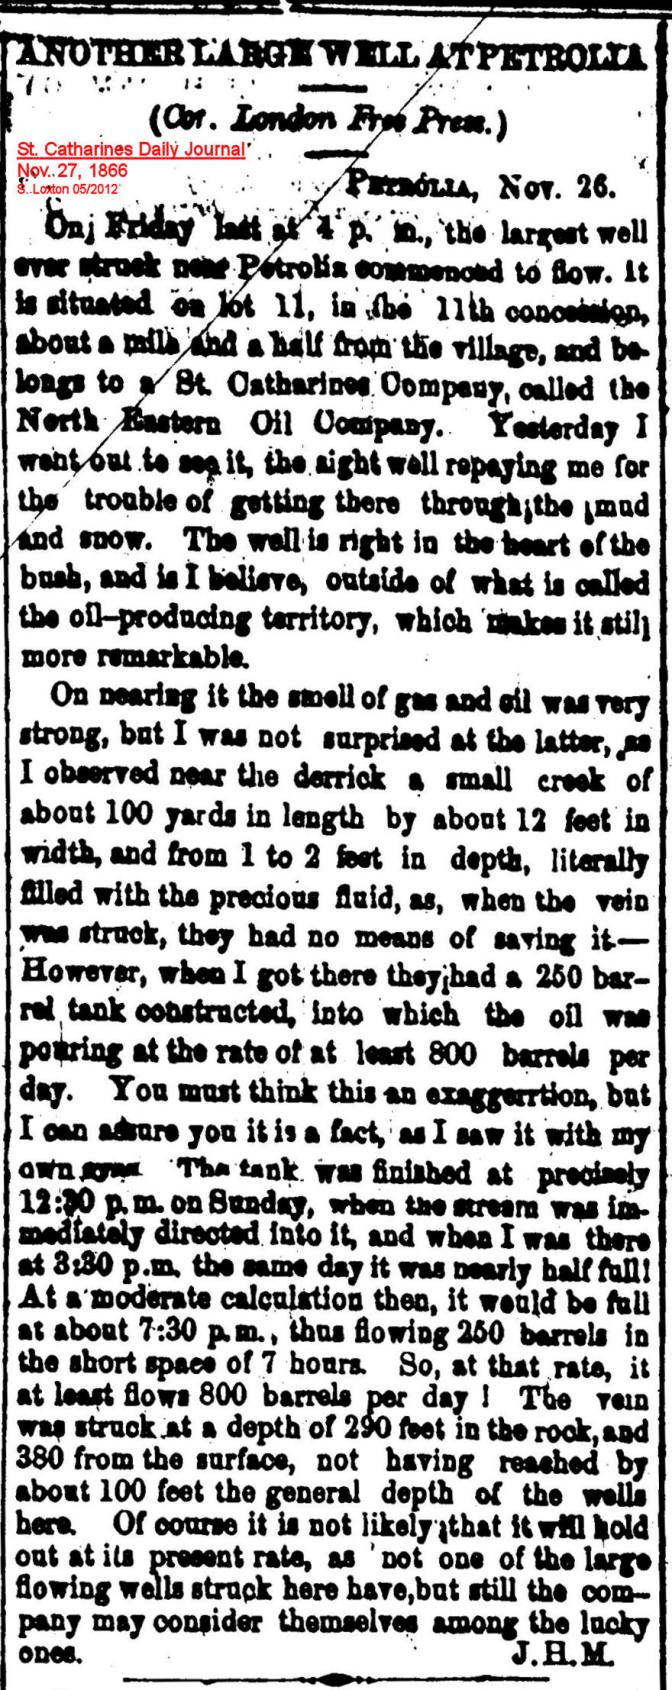 King well discovery_002_Nov 27, 1866_Daily Journal.jpg